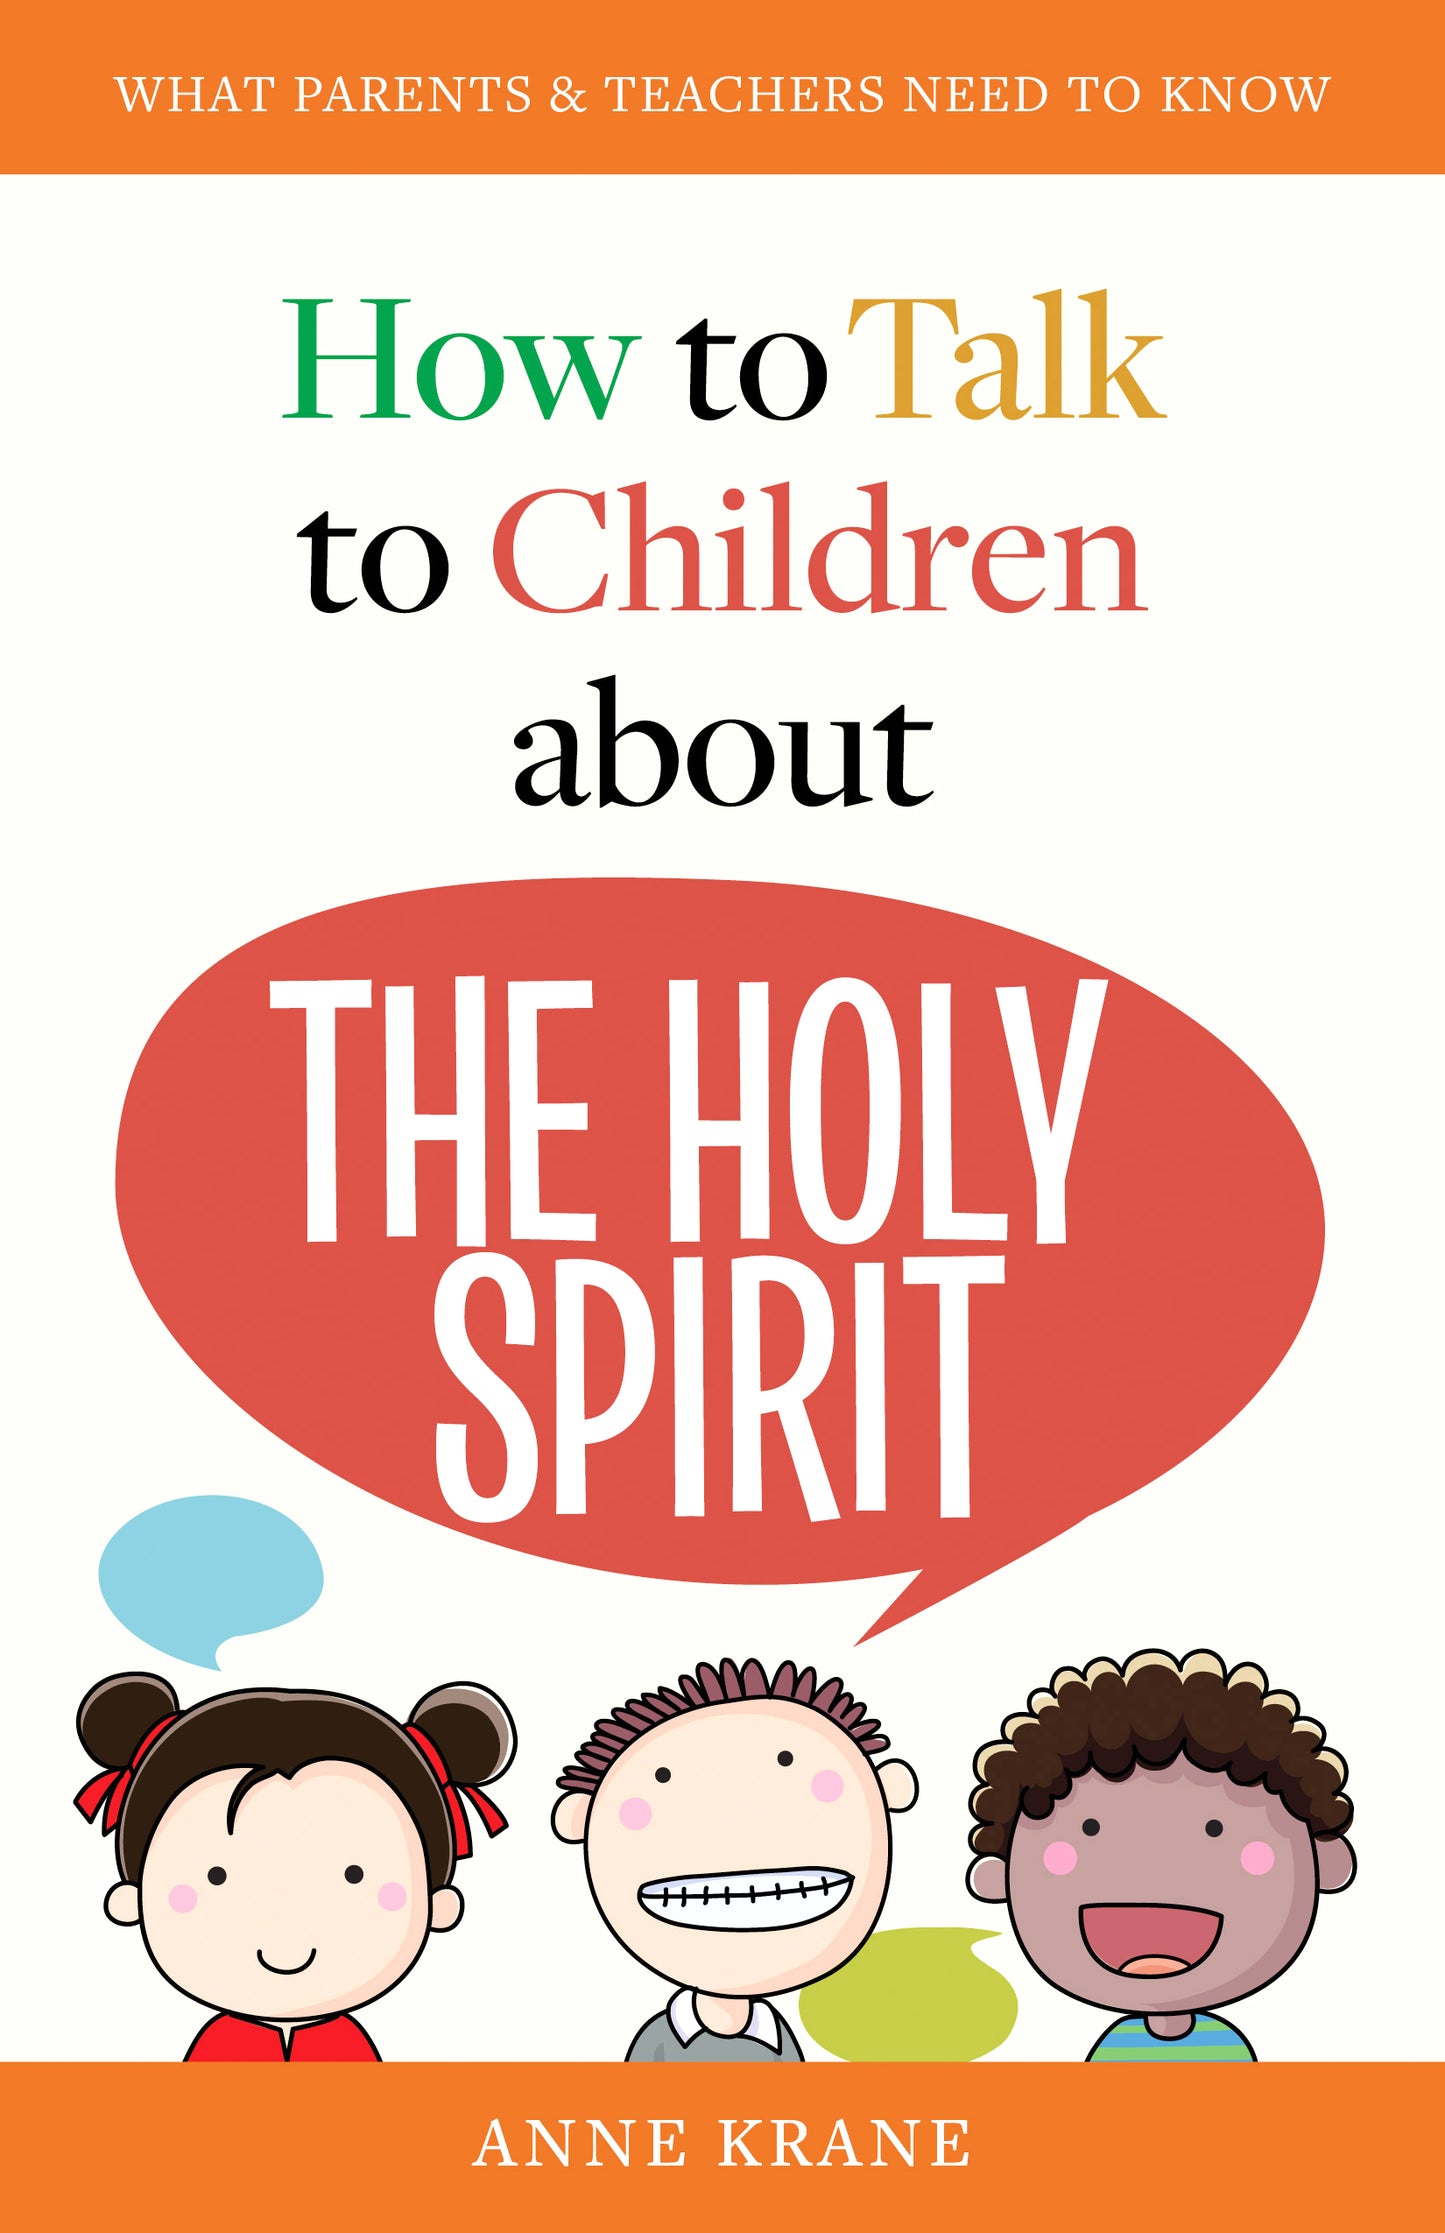 How to Talk to Children about the Holy Spirit